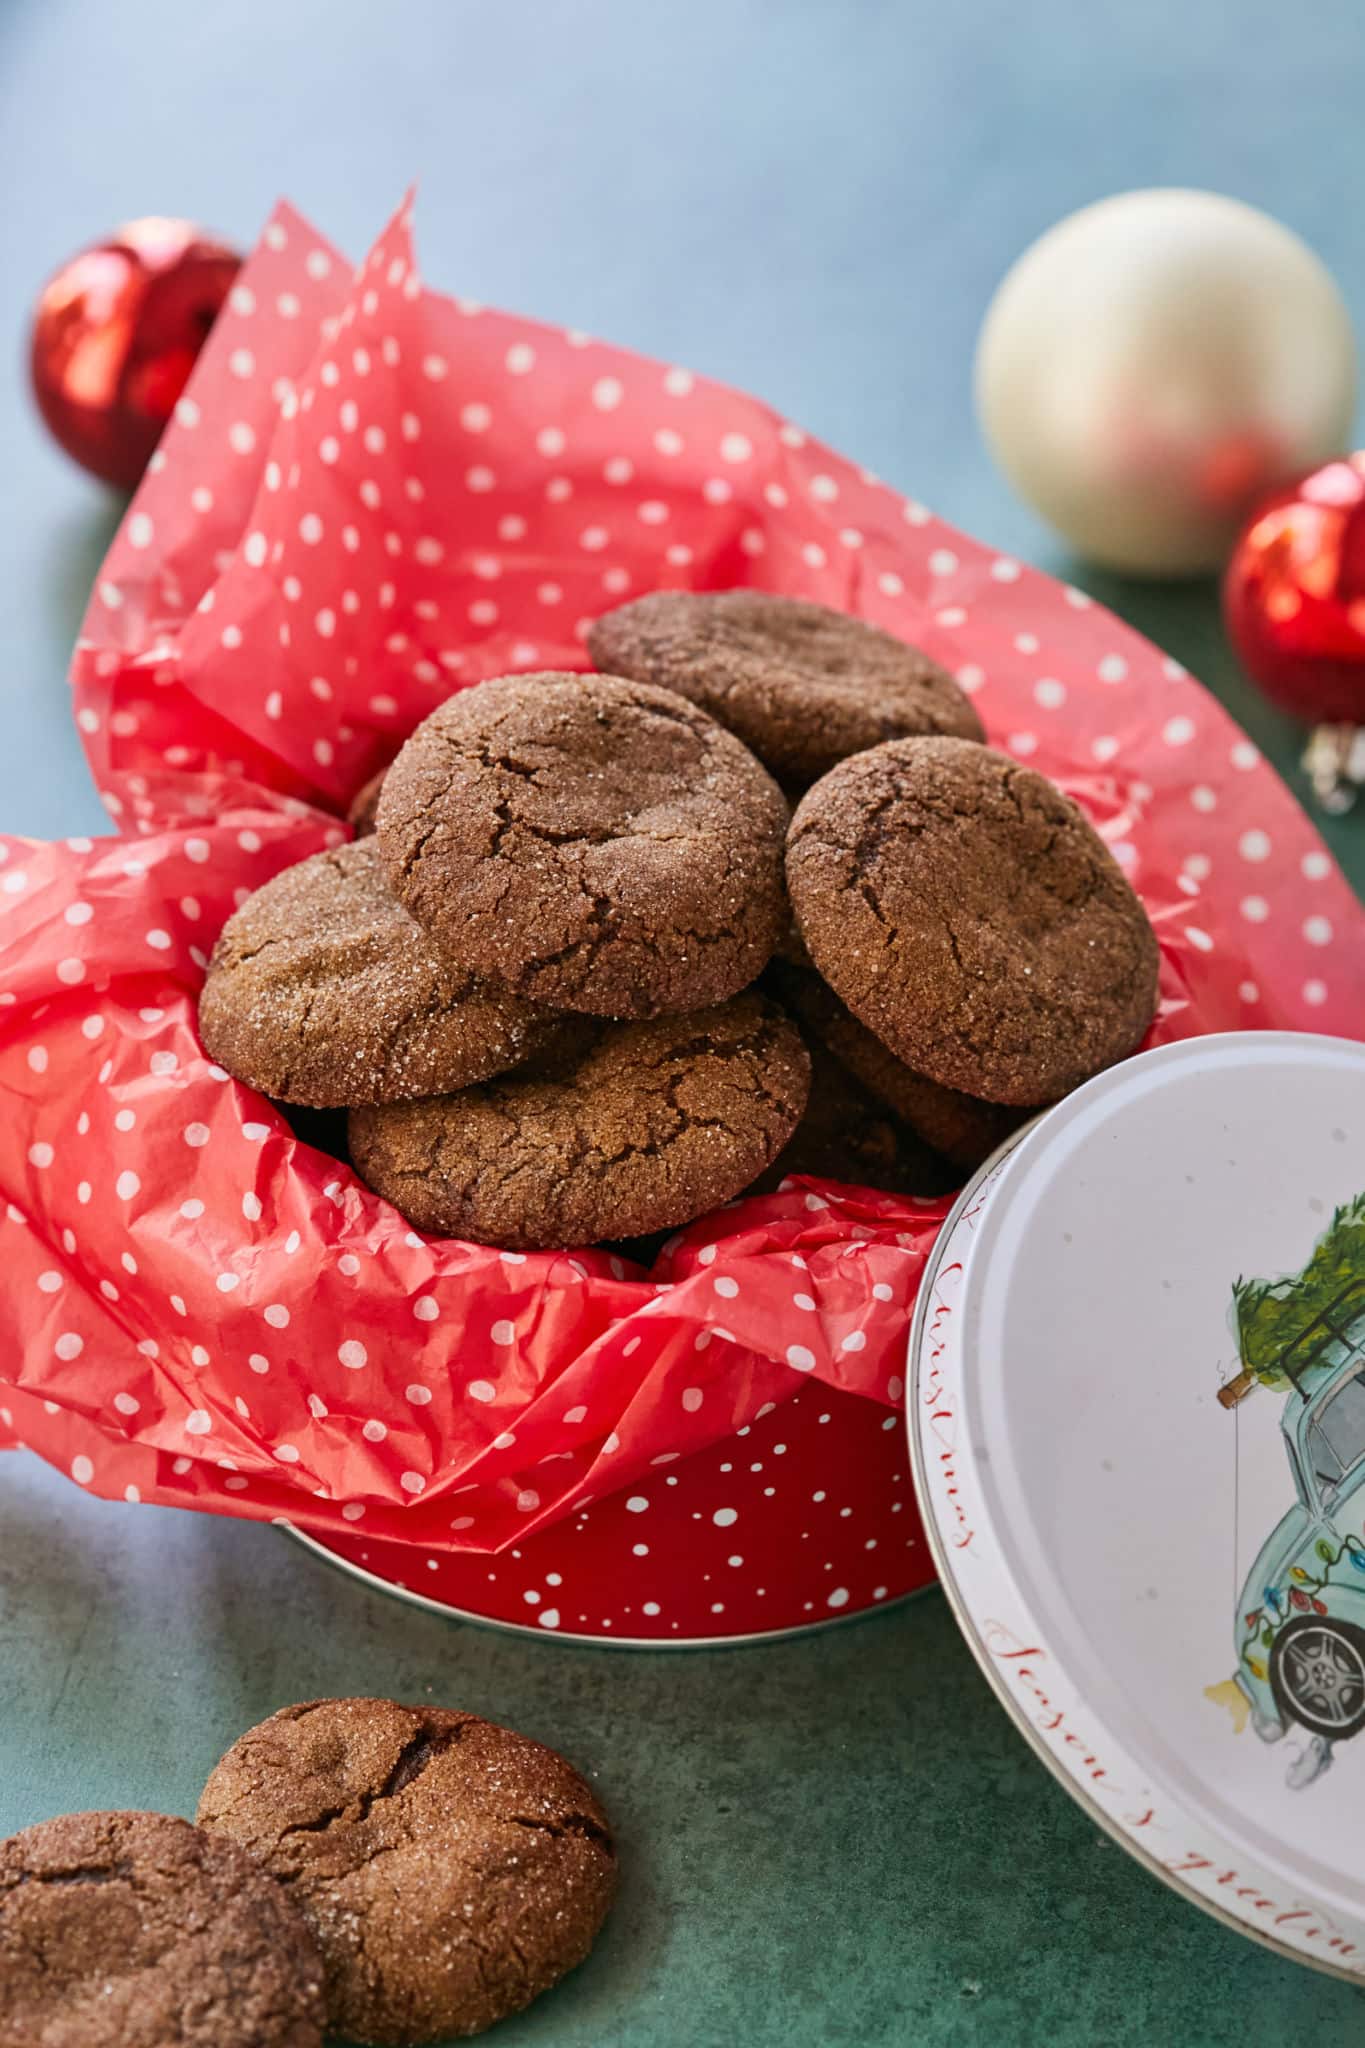 Homemade crispy gingersnaps are served in a Christmas tin with red tissue paper with white polka dots. In the background are Christmas ornaments. 